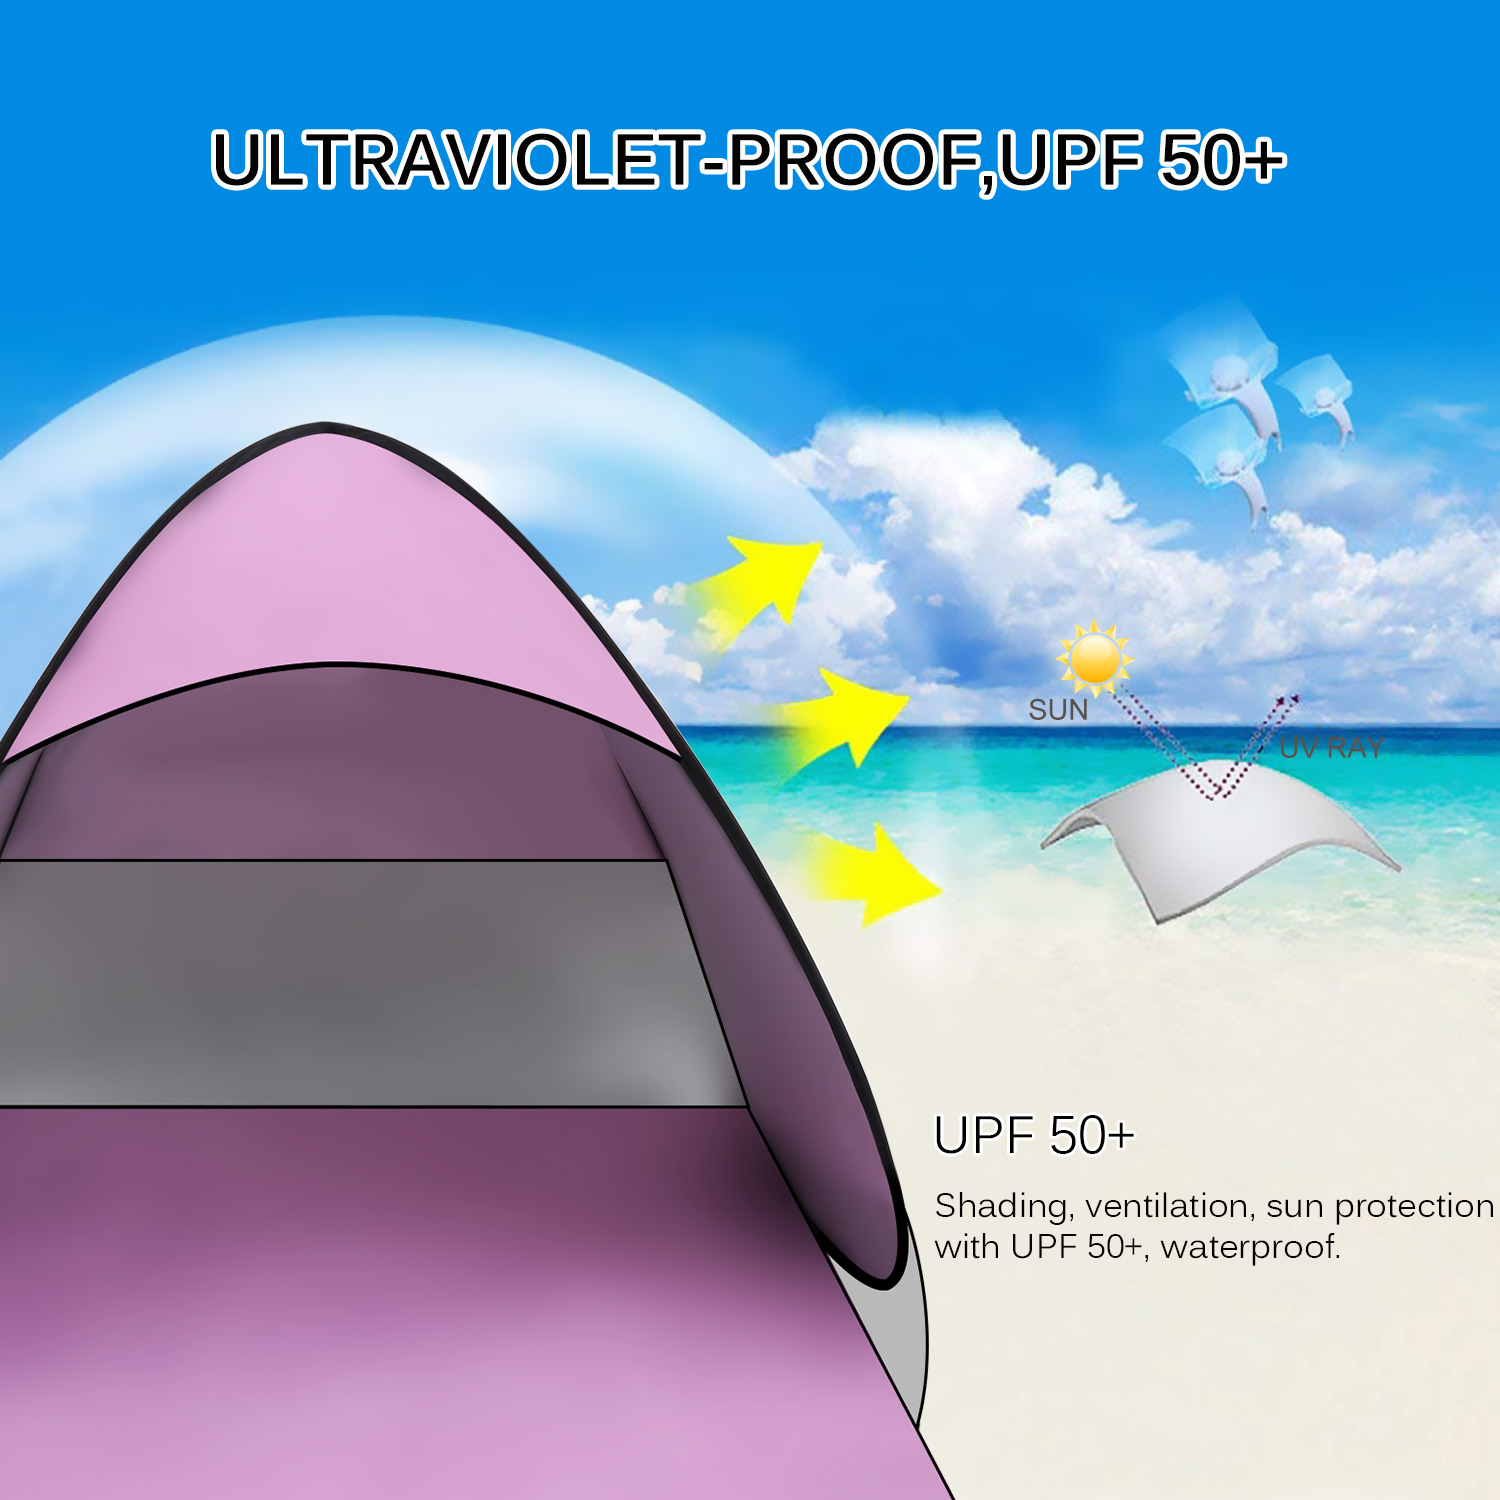 Cheap Goat Tents Automatic Instant Pop Up Tent Portable Beach Tent Lightweight Outdoor Uv Protection Camping Fishing Picnic Cabana Sun Shelter 20